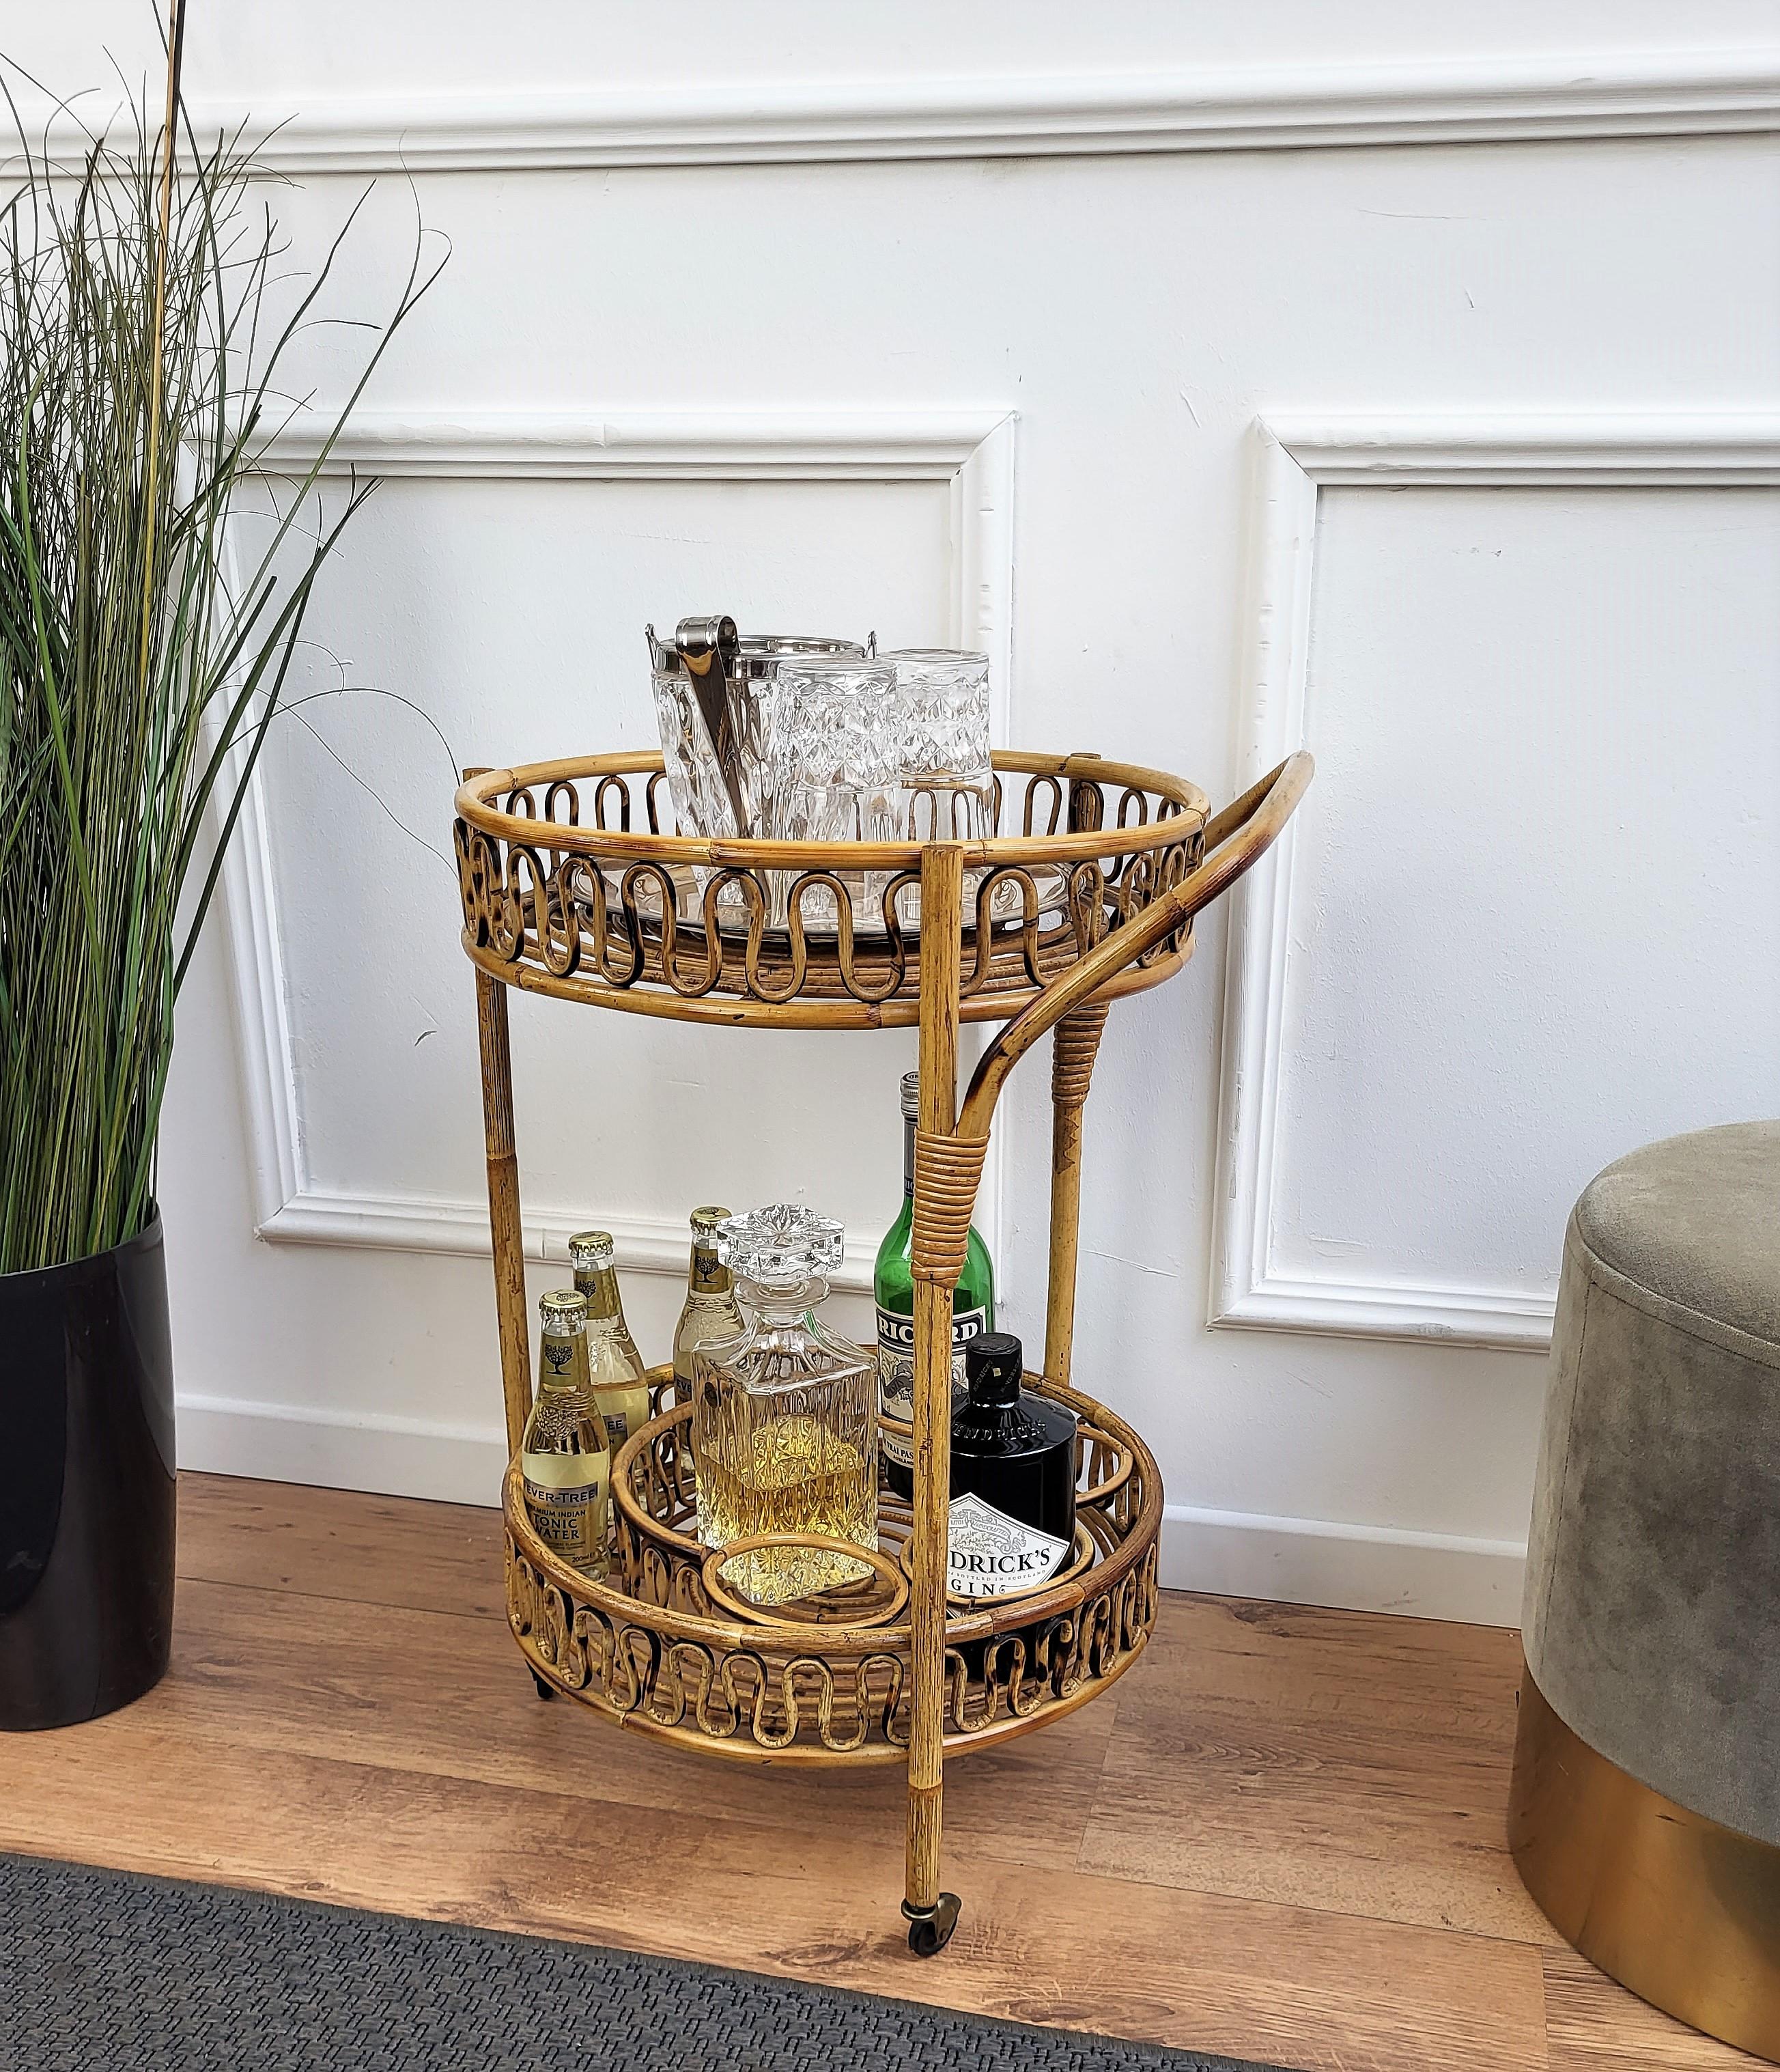 Beautiful 1960s Italian Mid-Century Modern serving bar cart trolley probably by the Italian Vittorio Bonacina featuring two shelves, with the bottom one with three bottle holders. Made of rattan and bamboo. This charming piece is in the typical